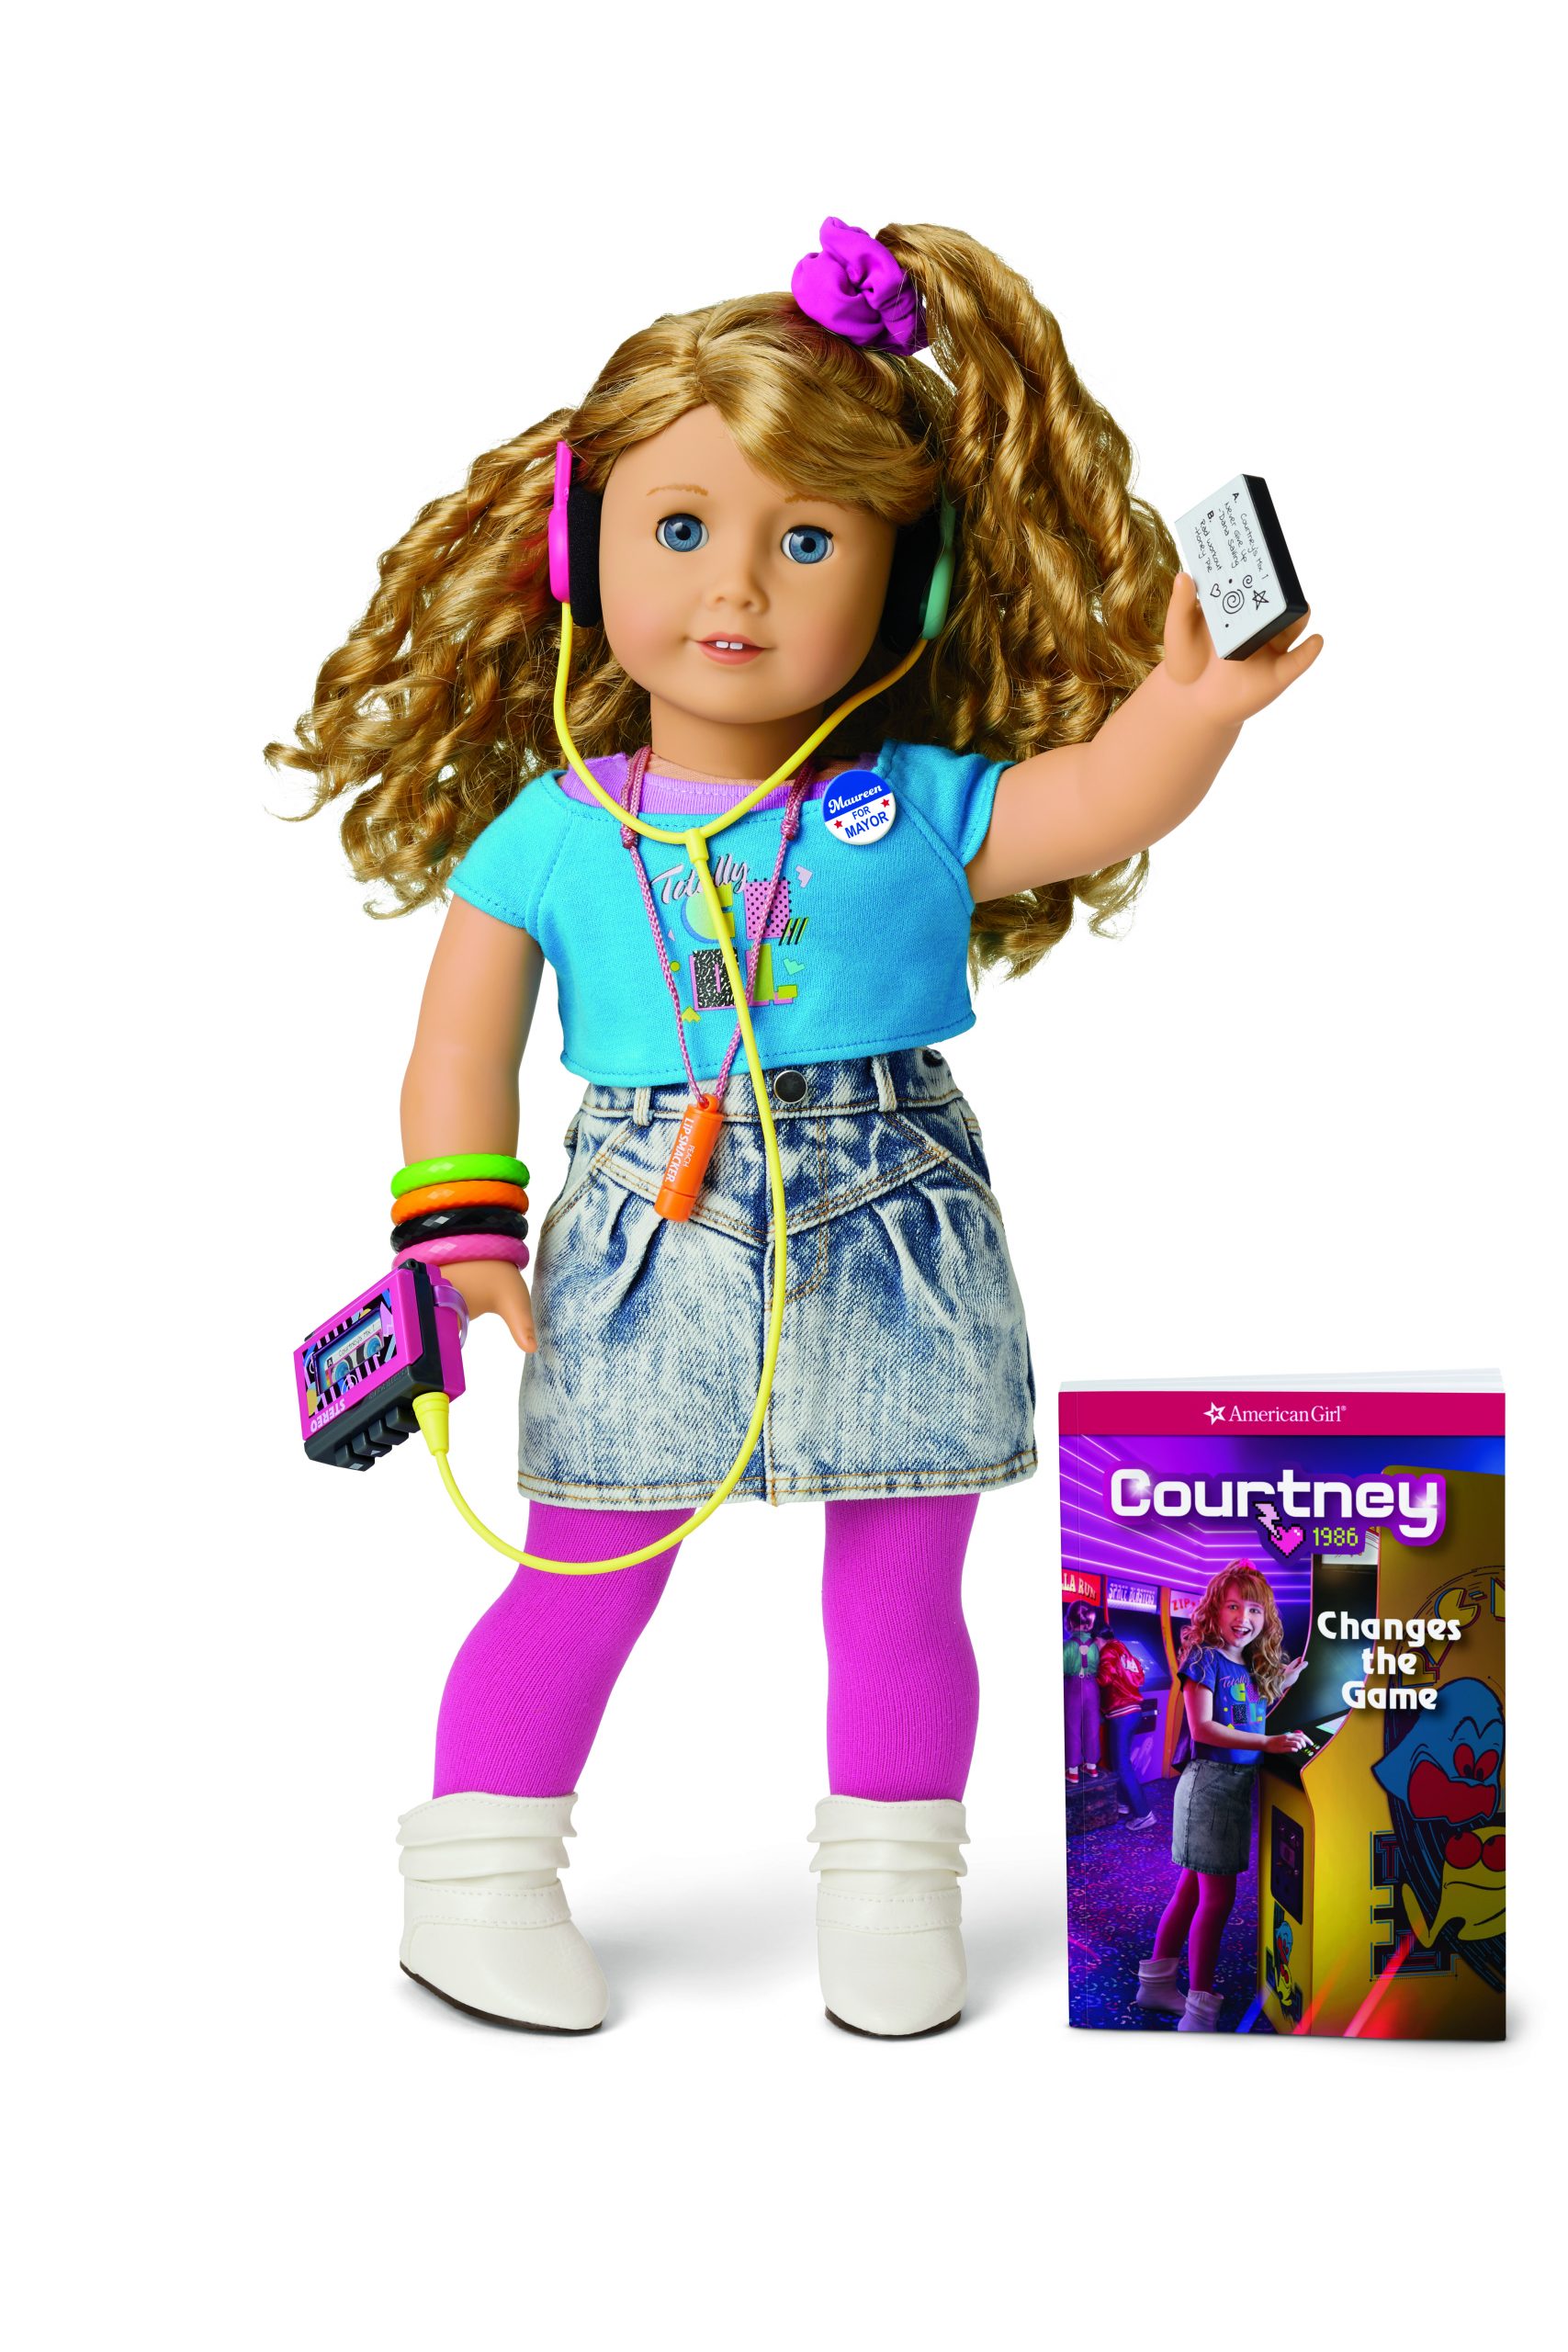 Courtney Doll, Book and Accessories